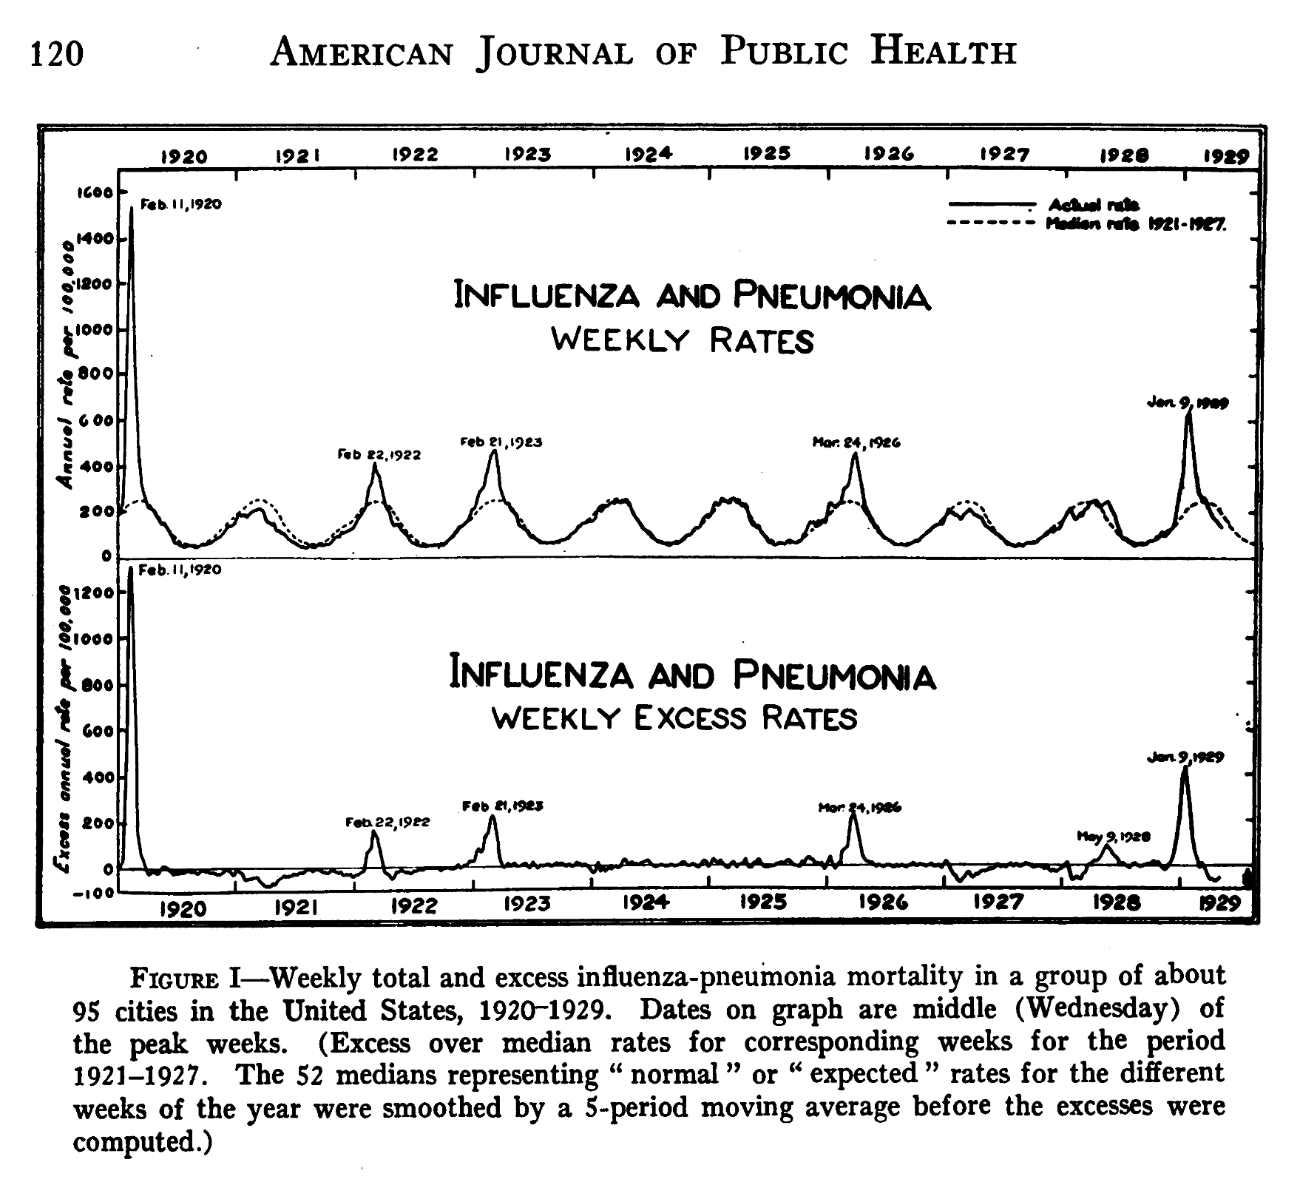 The graph shows a top line of undulating lines across the graph for each flu season from 1920 to 1929, labeled weekly rates influenza and pneumonia. There are additional peaks that are above the expected rates for February 1922, February 1923, March 1926, and January 1929. In the lower graph labeled weekly excess rates, it shows peaks in February 1922, February 1923, March 1926, May 1928, and January 1929.